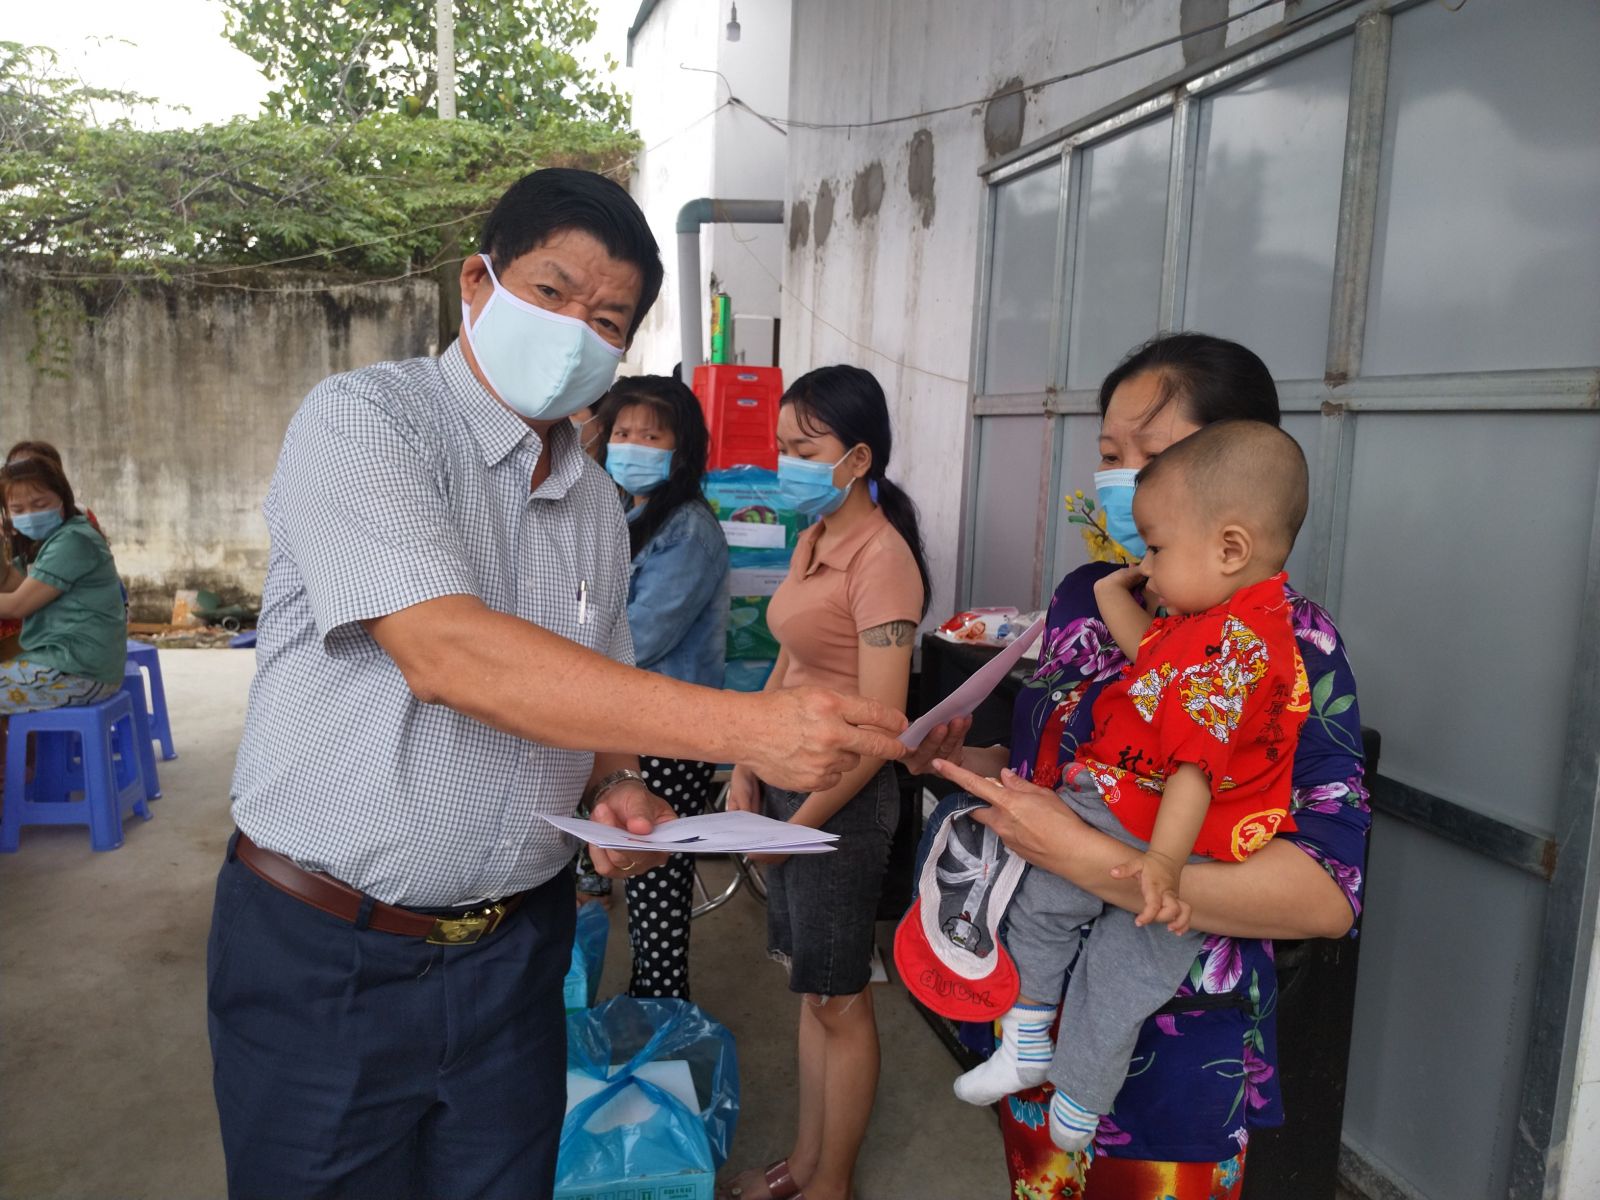 Chairman of the People's Committee of Ben Luc district - Tran Van Tuoi presents gifts to the workers working in the inns in the district, who do not return hometown to celebrate Tet